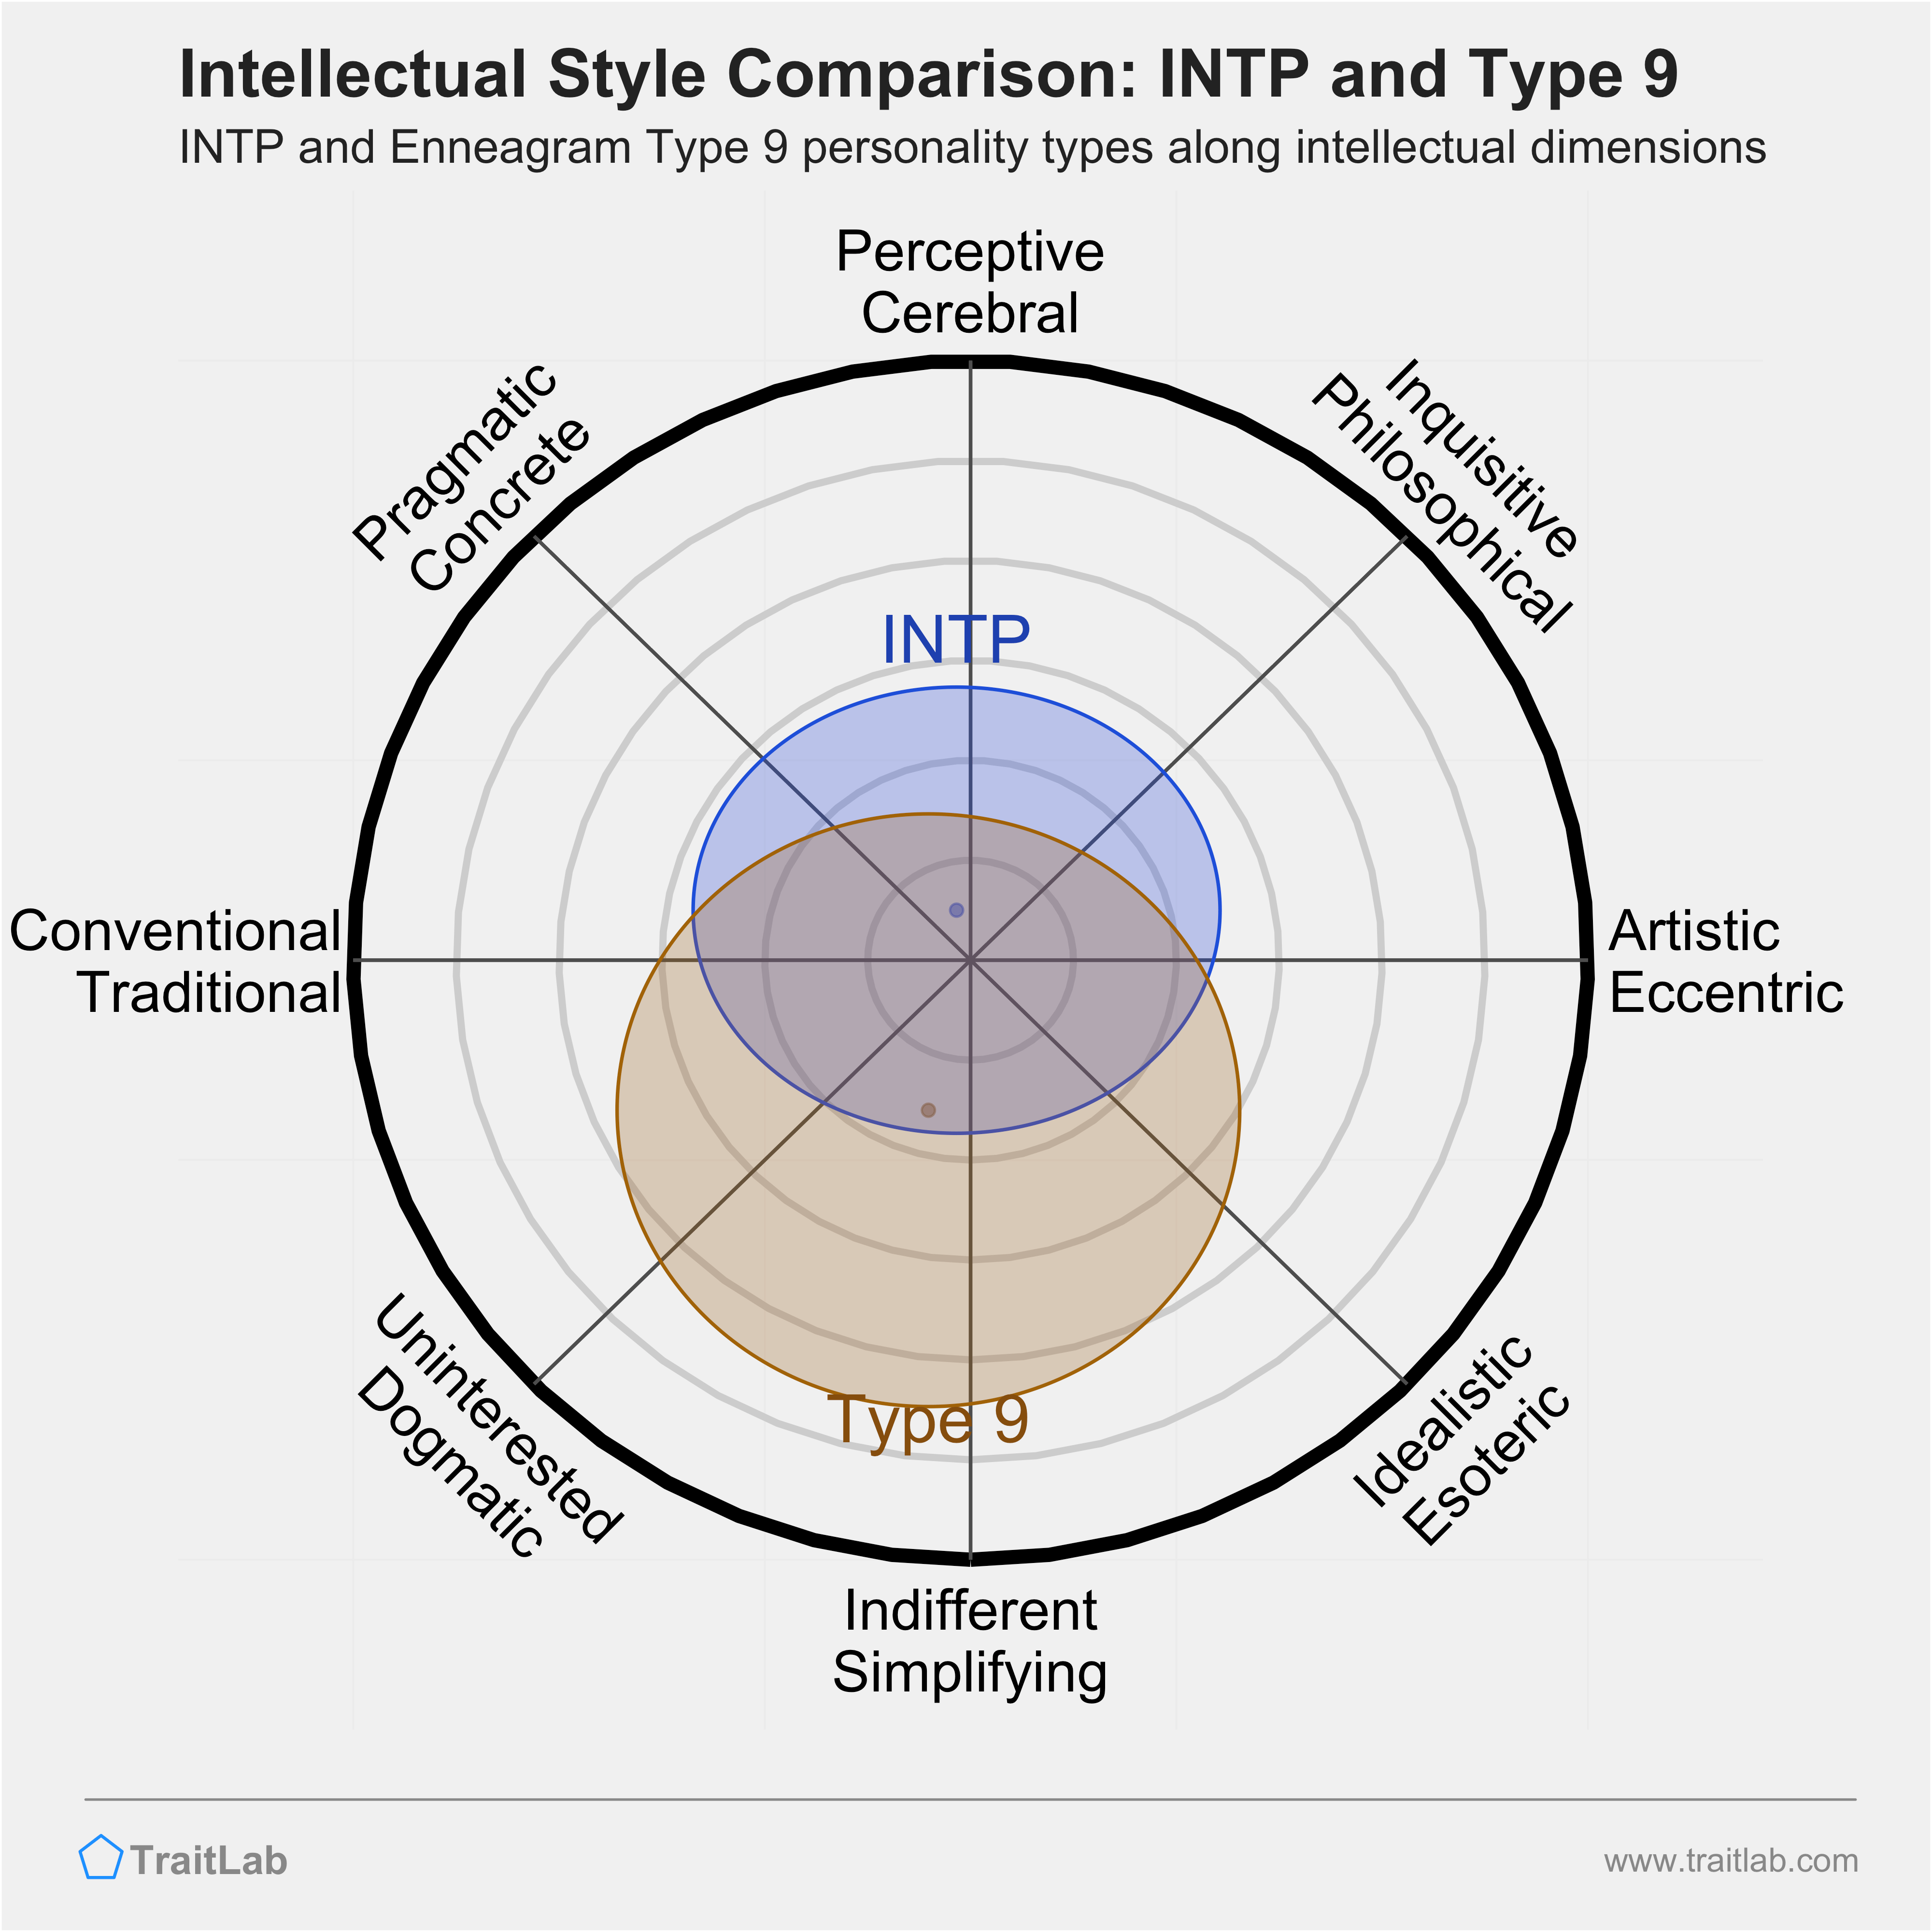 INTP and Type 9 comparison across intellectual dimensions